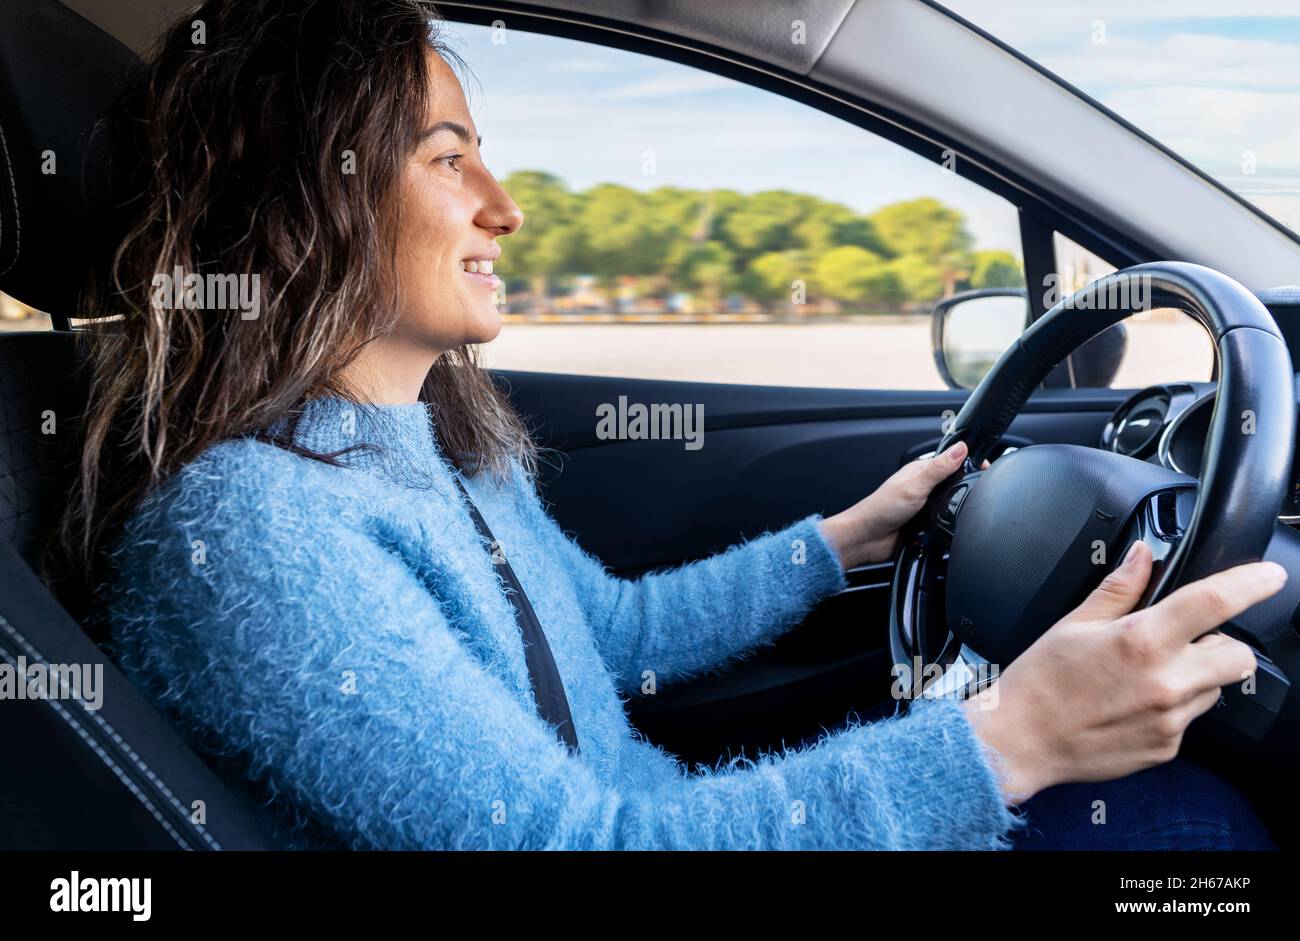 Young woman driving car on the road. Driver licence and driving safety concept. Stock Photo